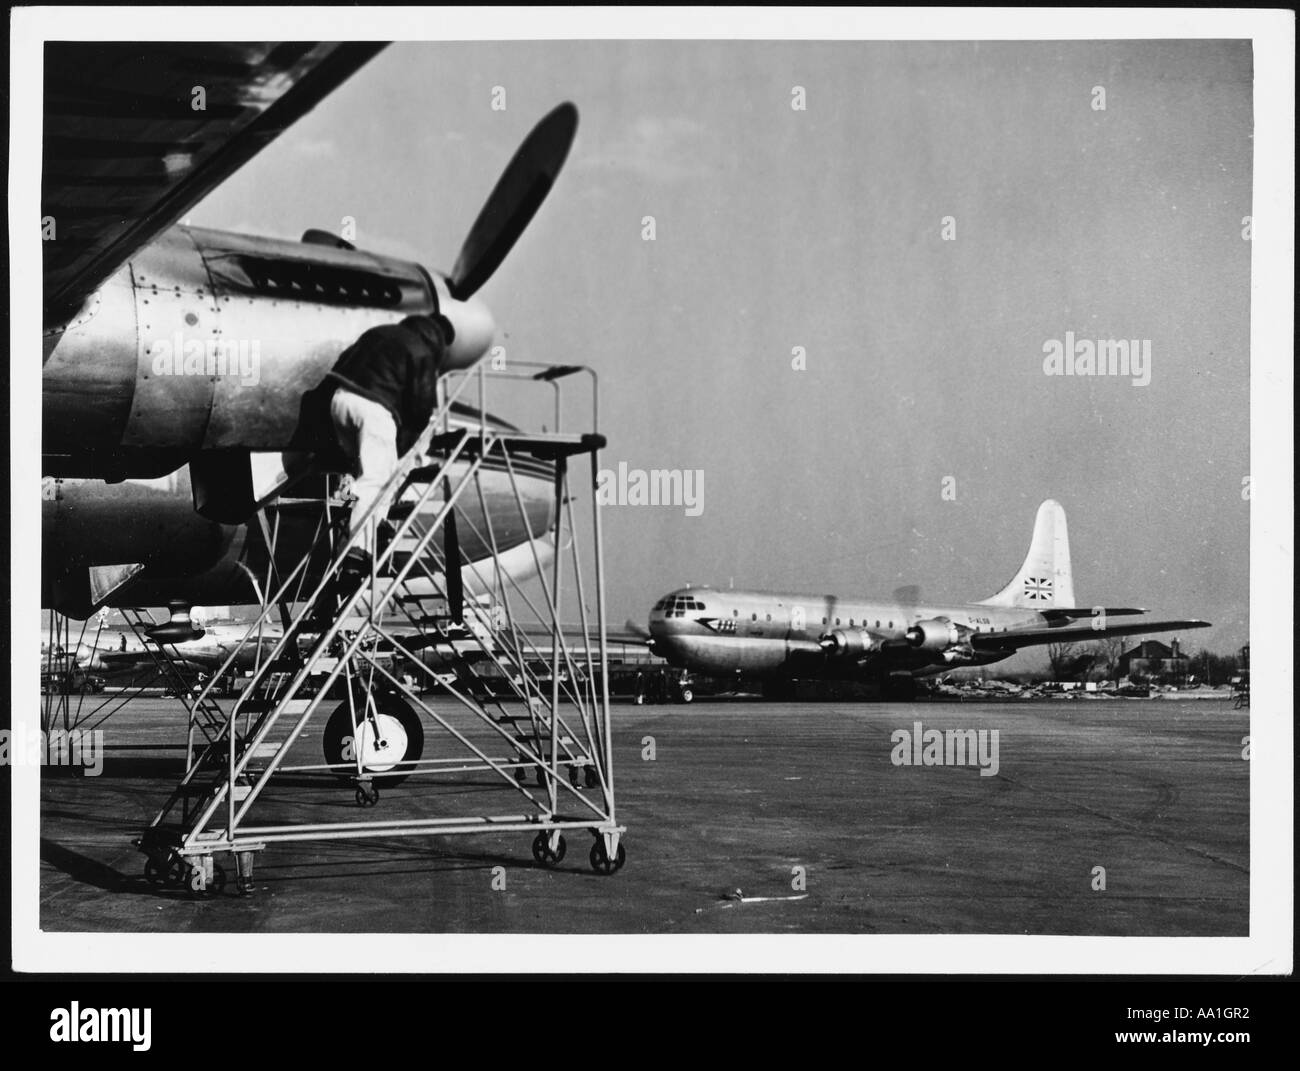 London Airport 1950s Stock Photo, Royalty Free Image: 7133553 - Alamy